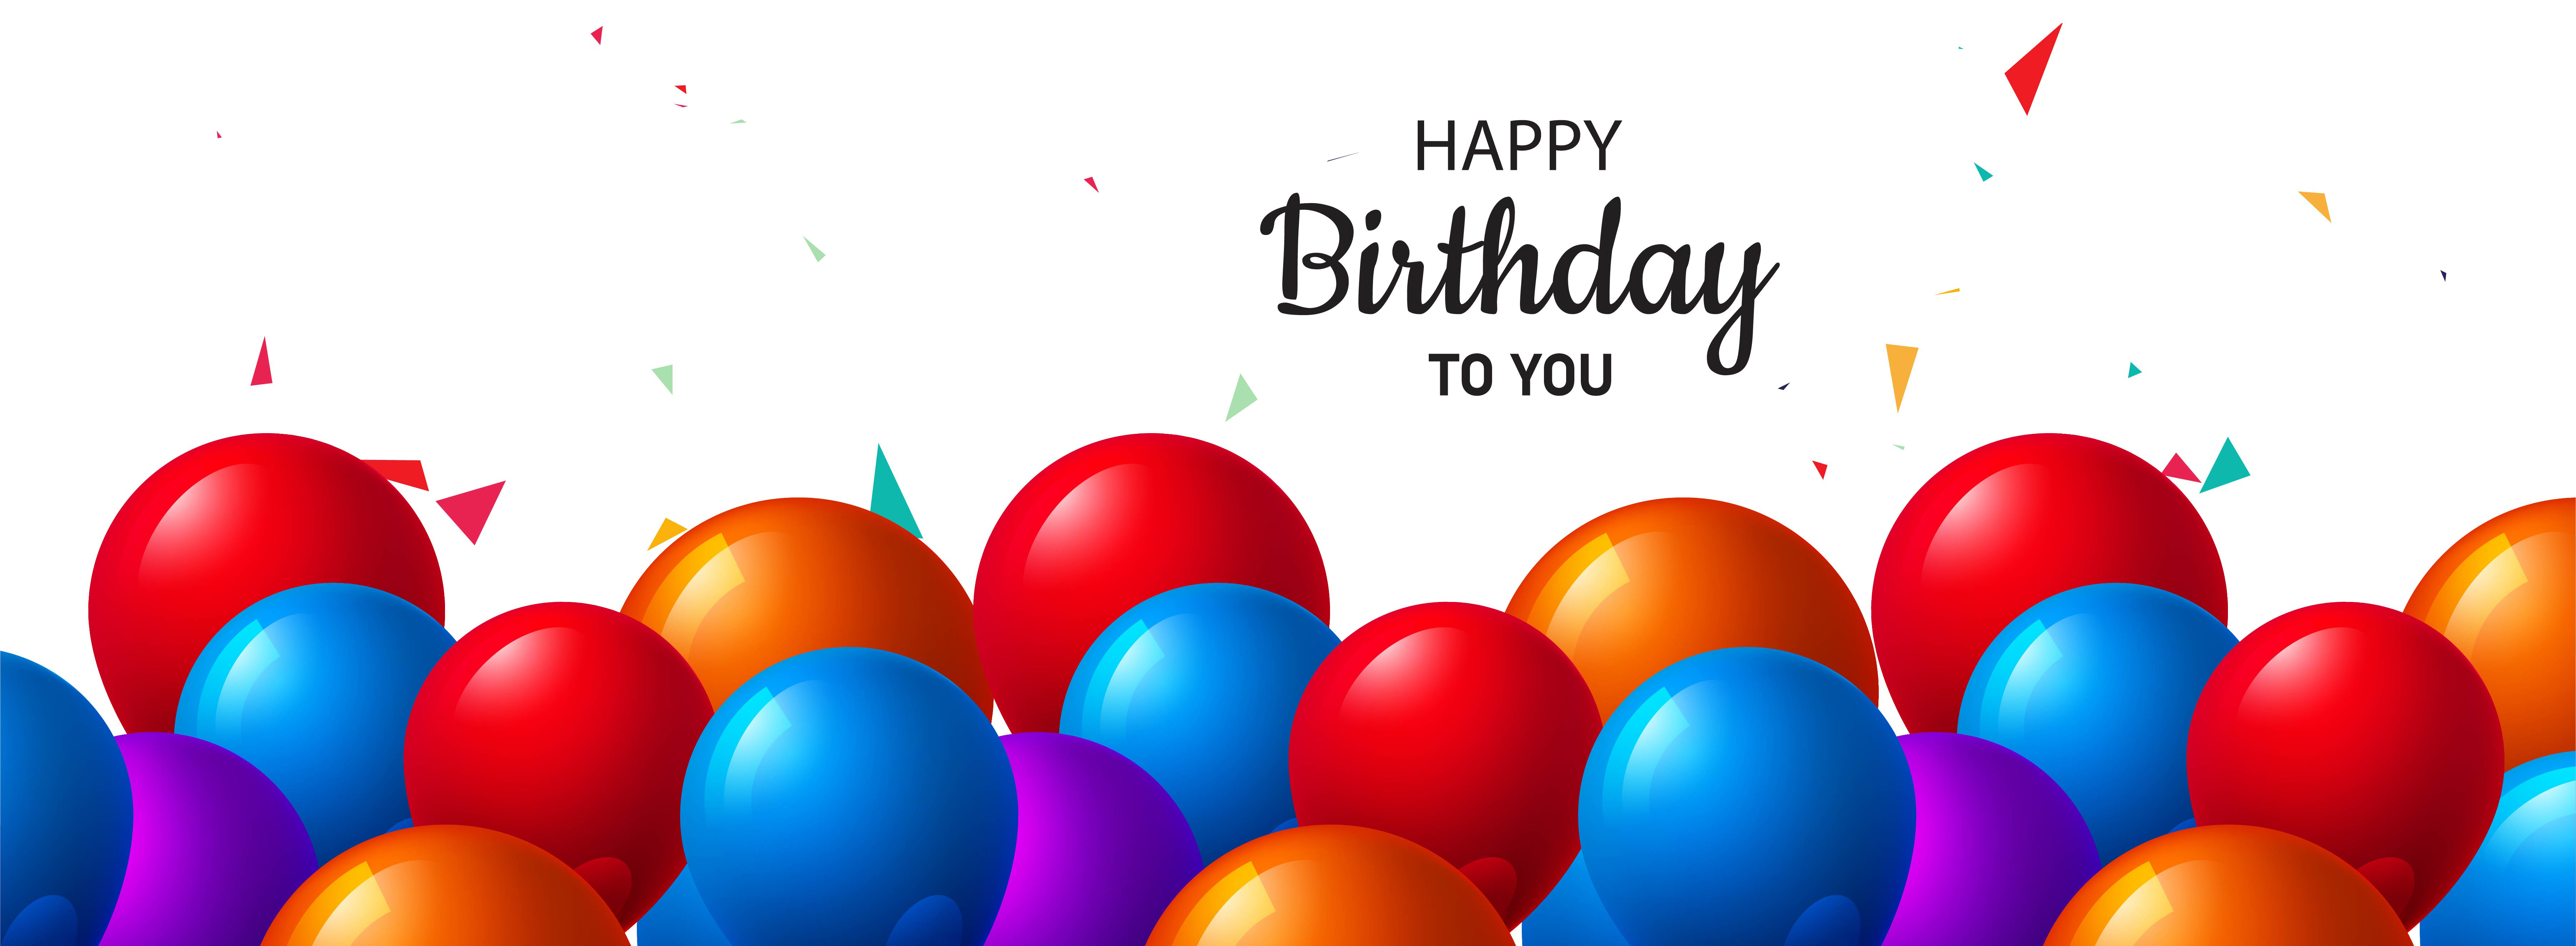 Free Vector  Beautiful birthday photo frame banner with balloons